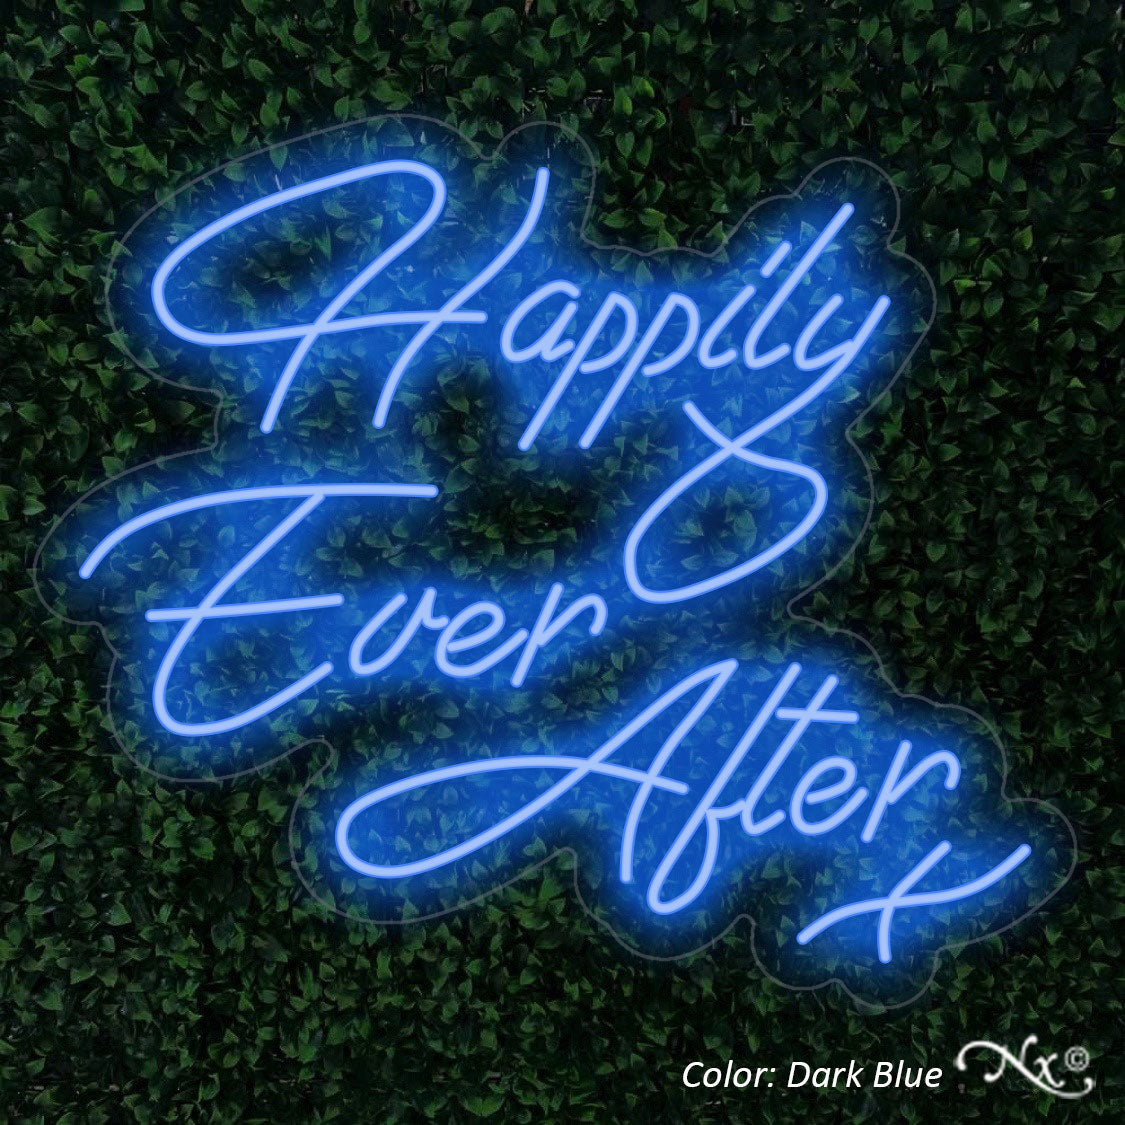 Happily Ever After Neon Sign color dark blue